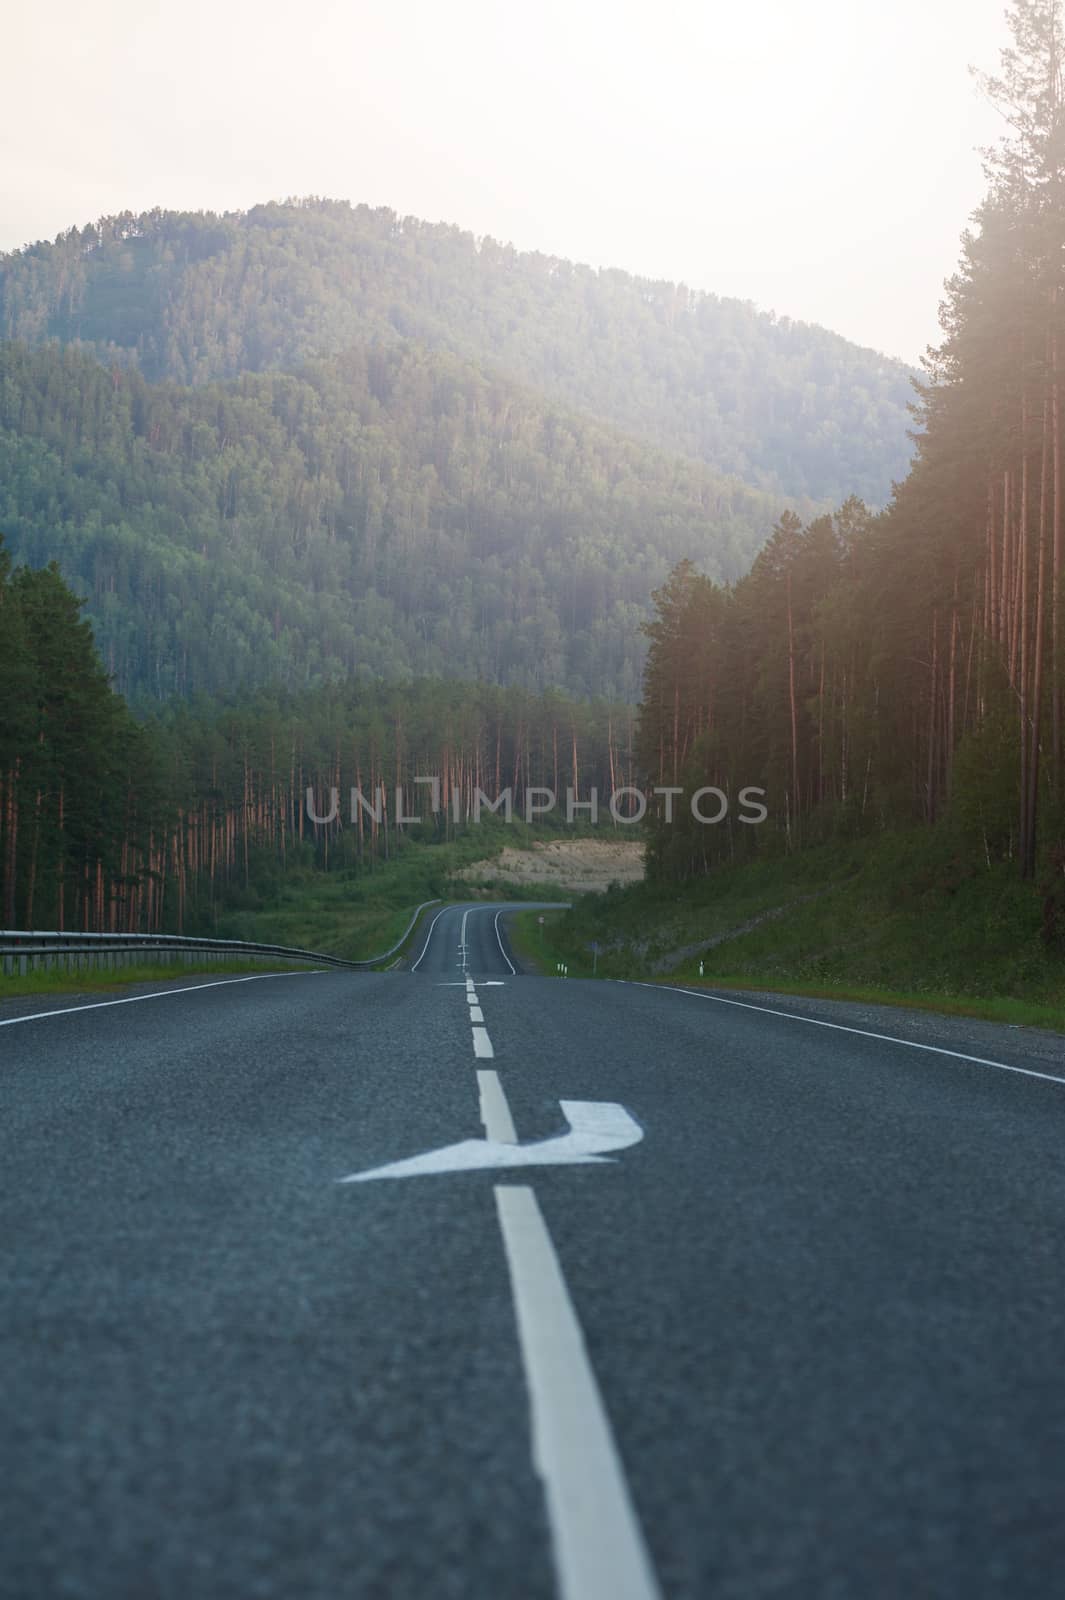 Beauty road M52 called Chemalsky trakt in Altay, Siberia, Russia.